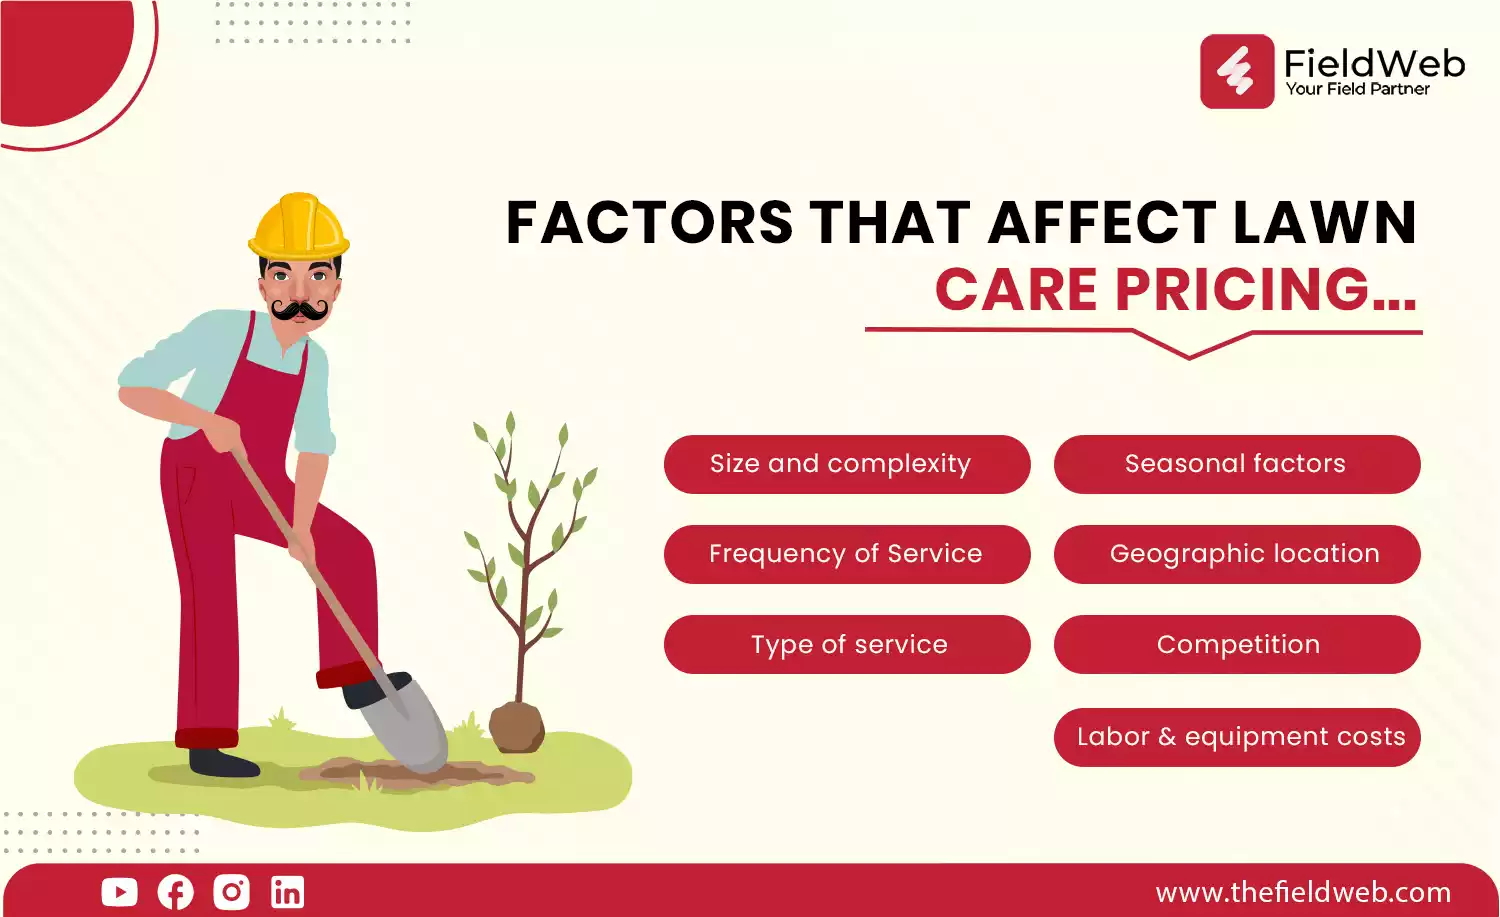 image is displaying 7 factors that affect lawn care pricing